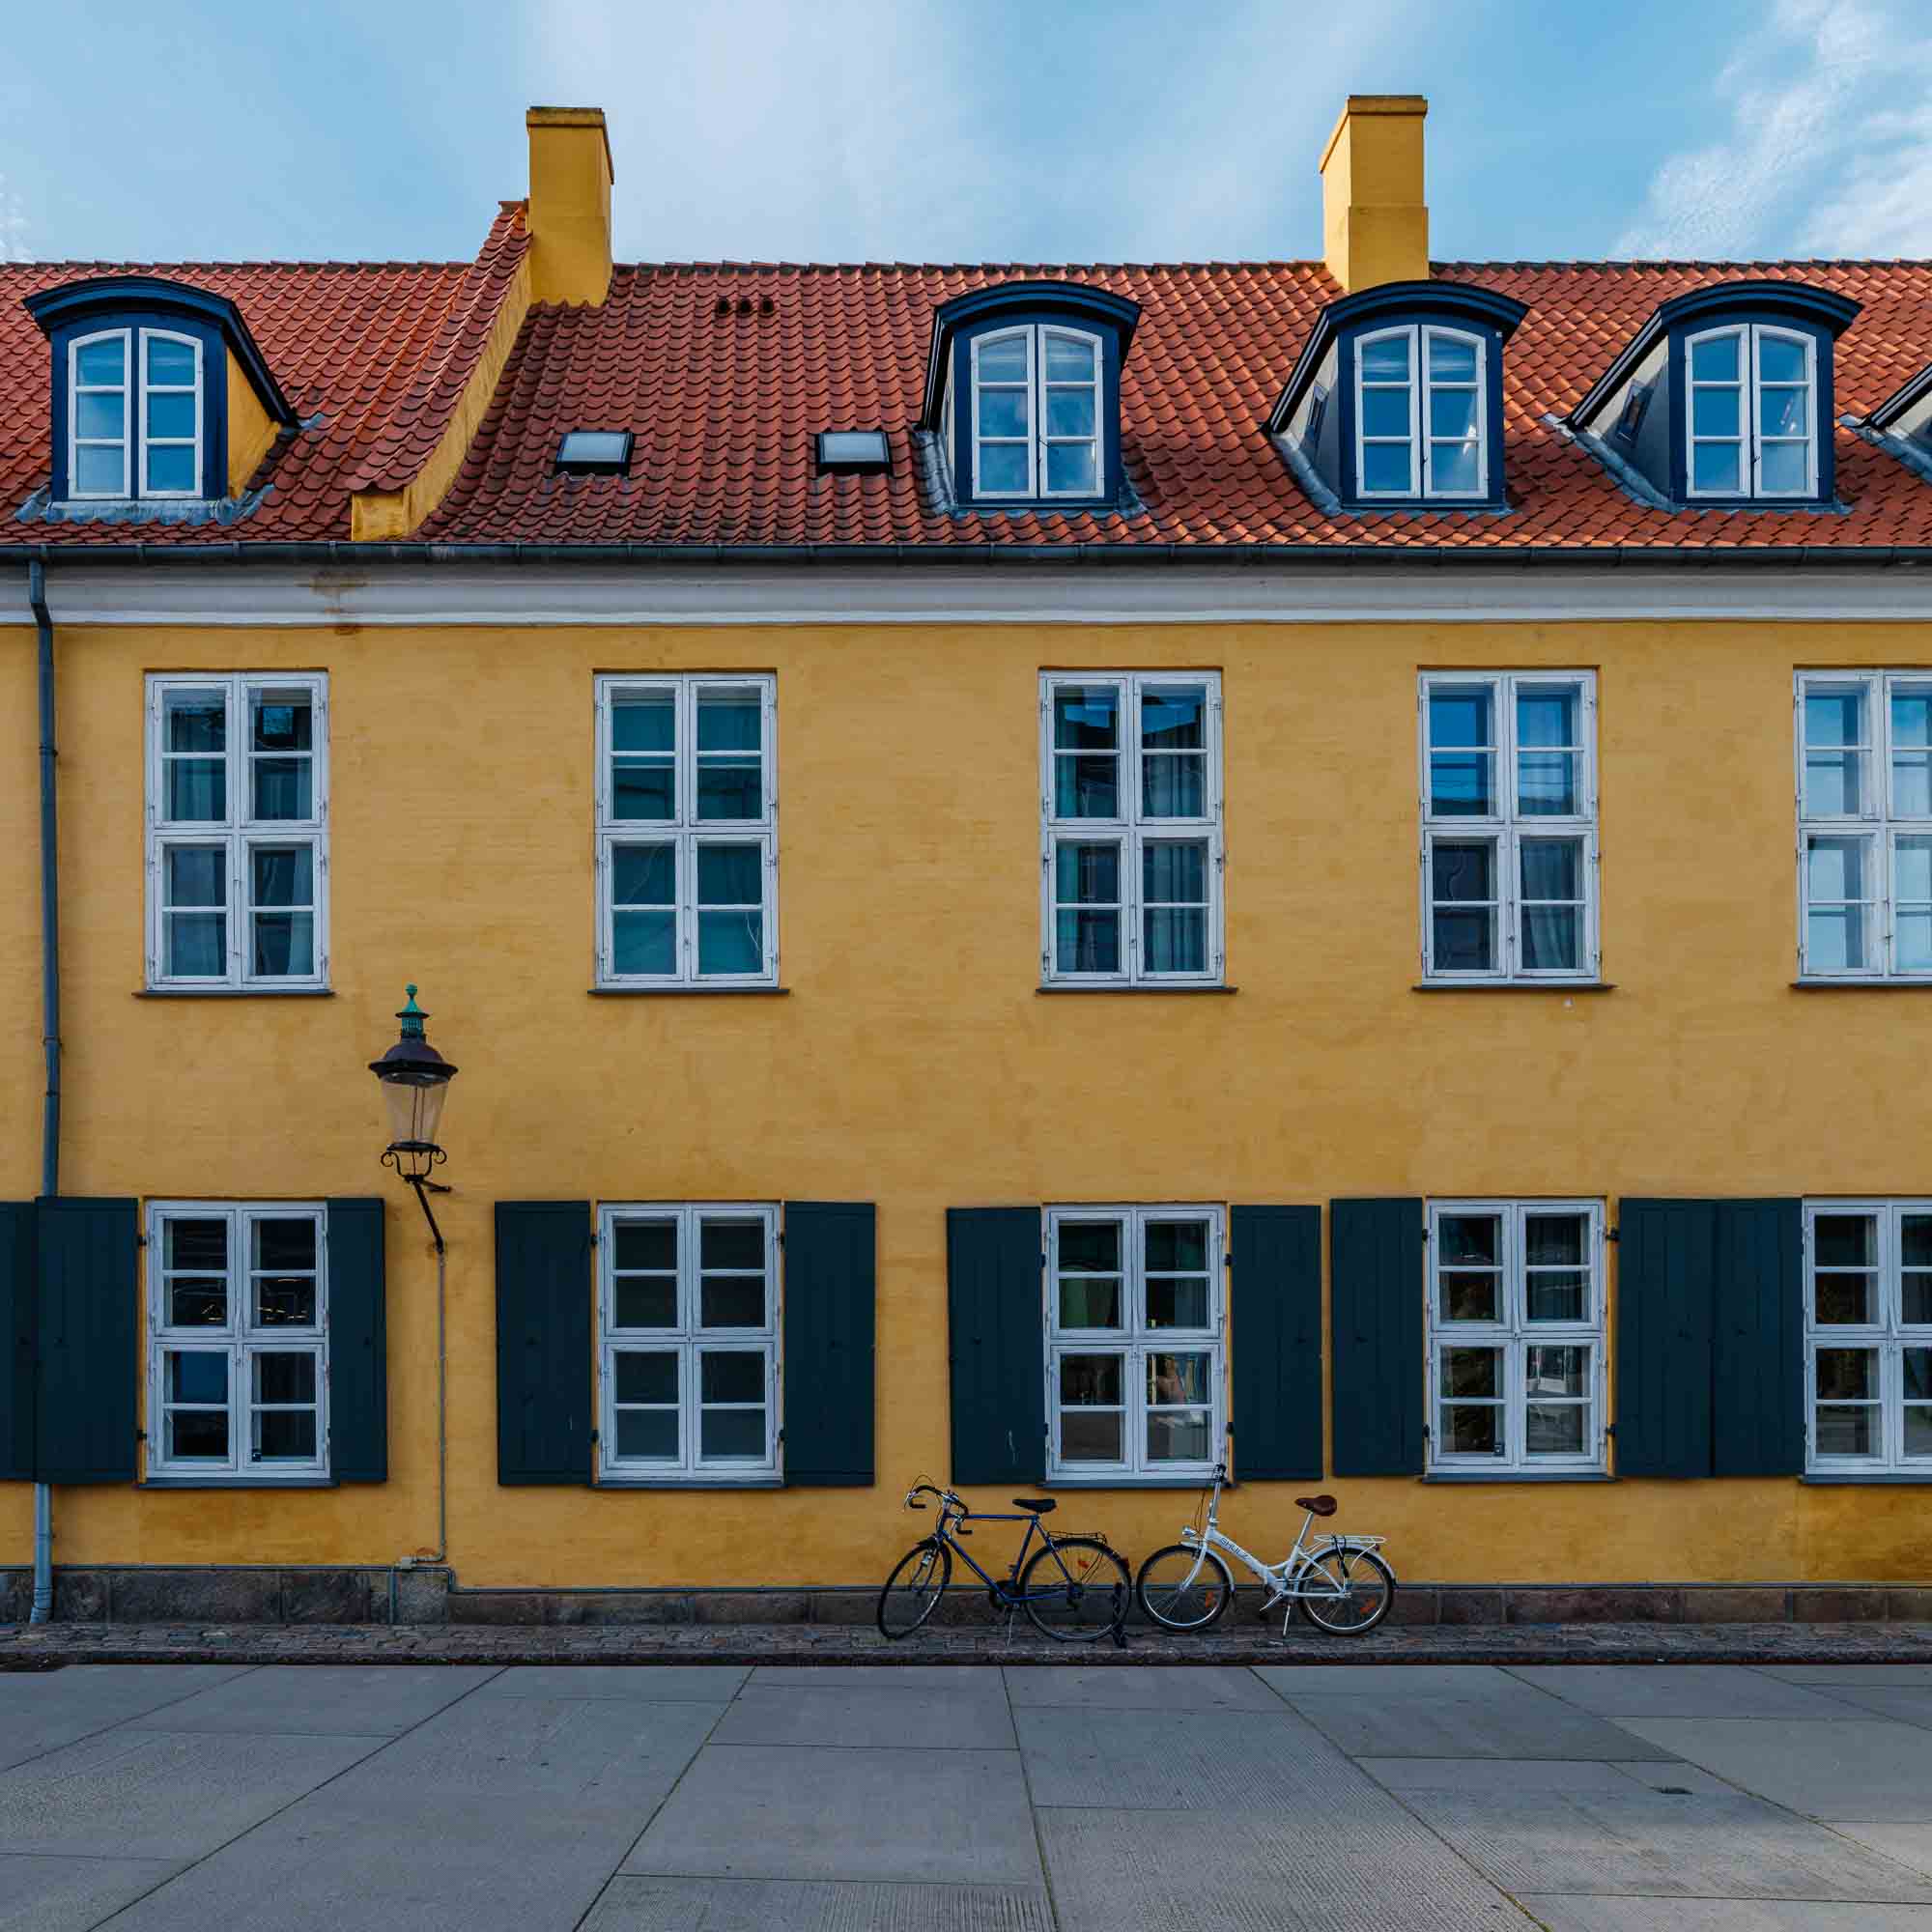 "Colorful image of a yellow building with green shutters and a bicycle in front on a street in Copenhagen, Denmark."